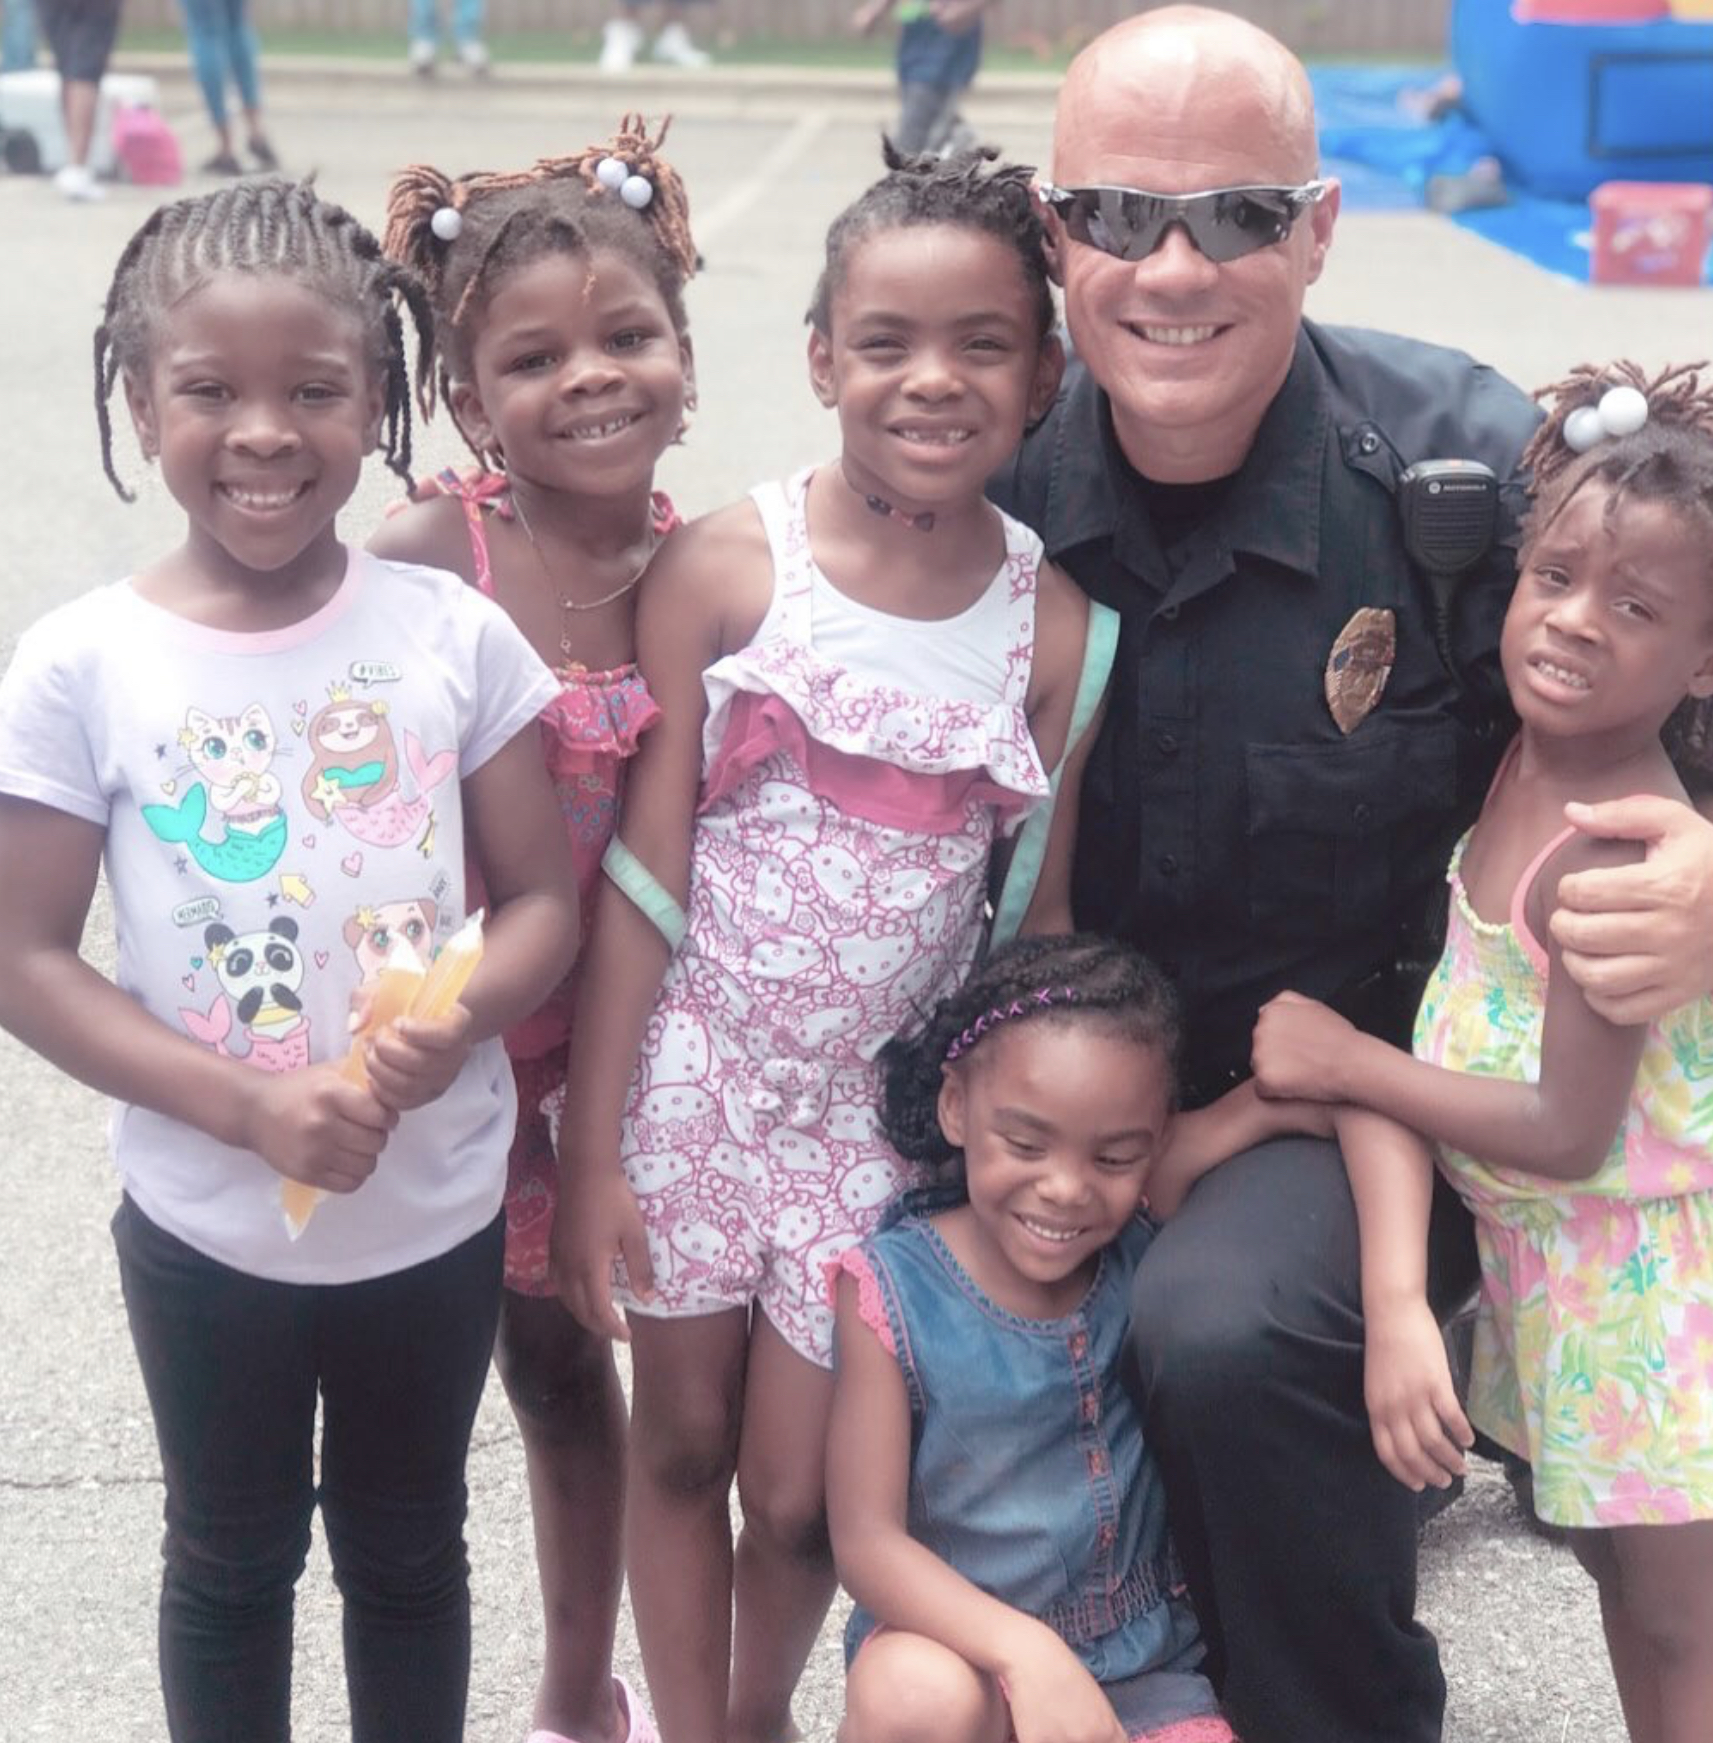 Norman’s unorthodox approach to policing includes thousands of video posts, pictures and daily interactive engagement at the Boys & Girls Clubs and the Police Athletic League with those that he protects and serves.